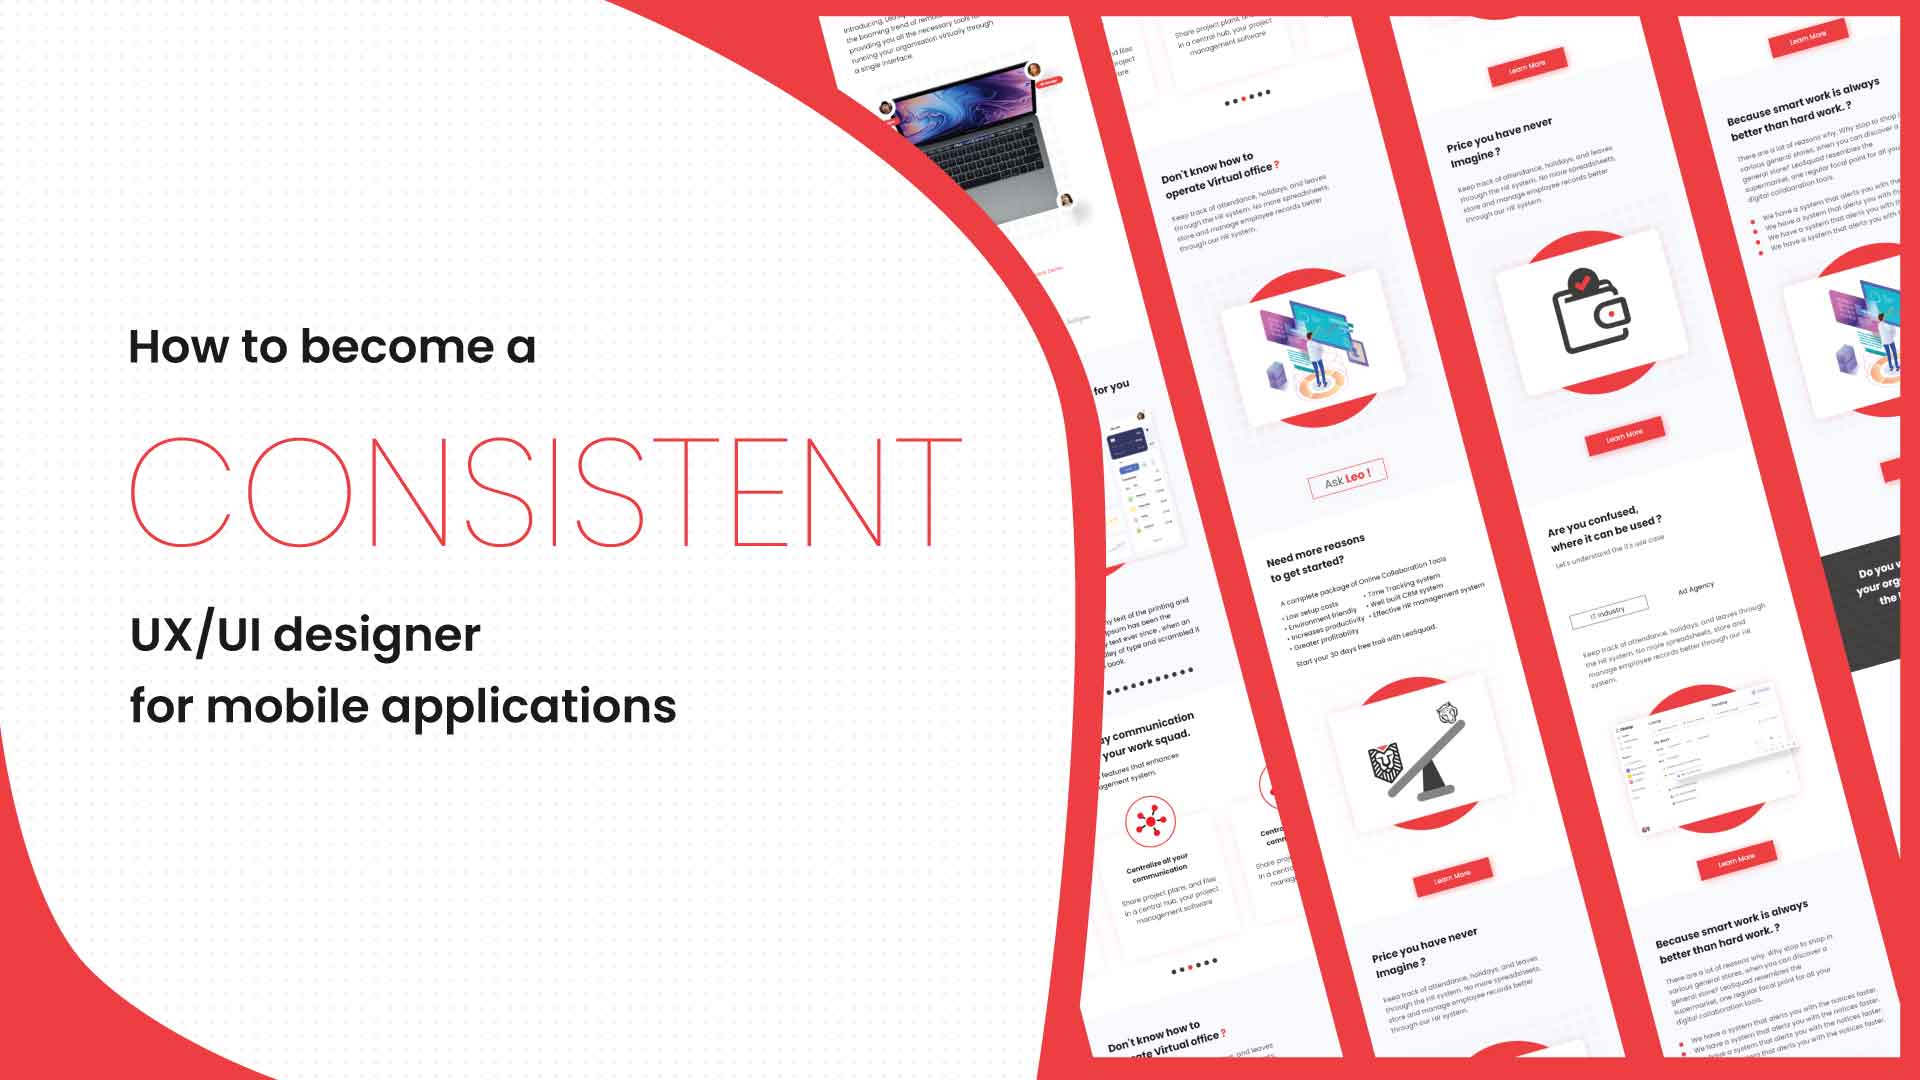 How to become a consistent UX/UI designer for mobile applications?